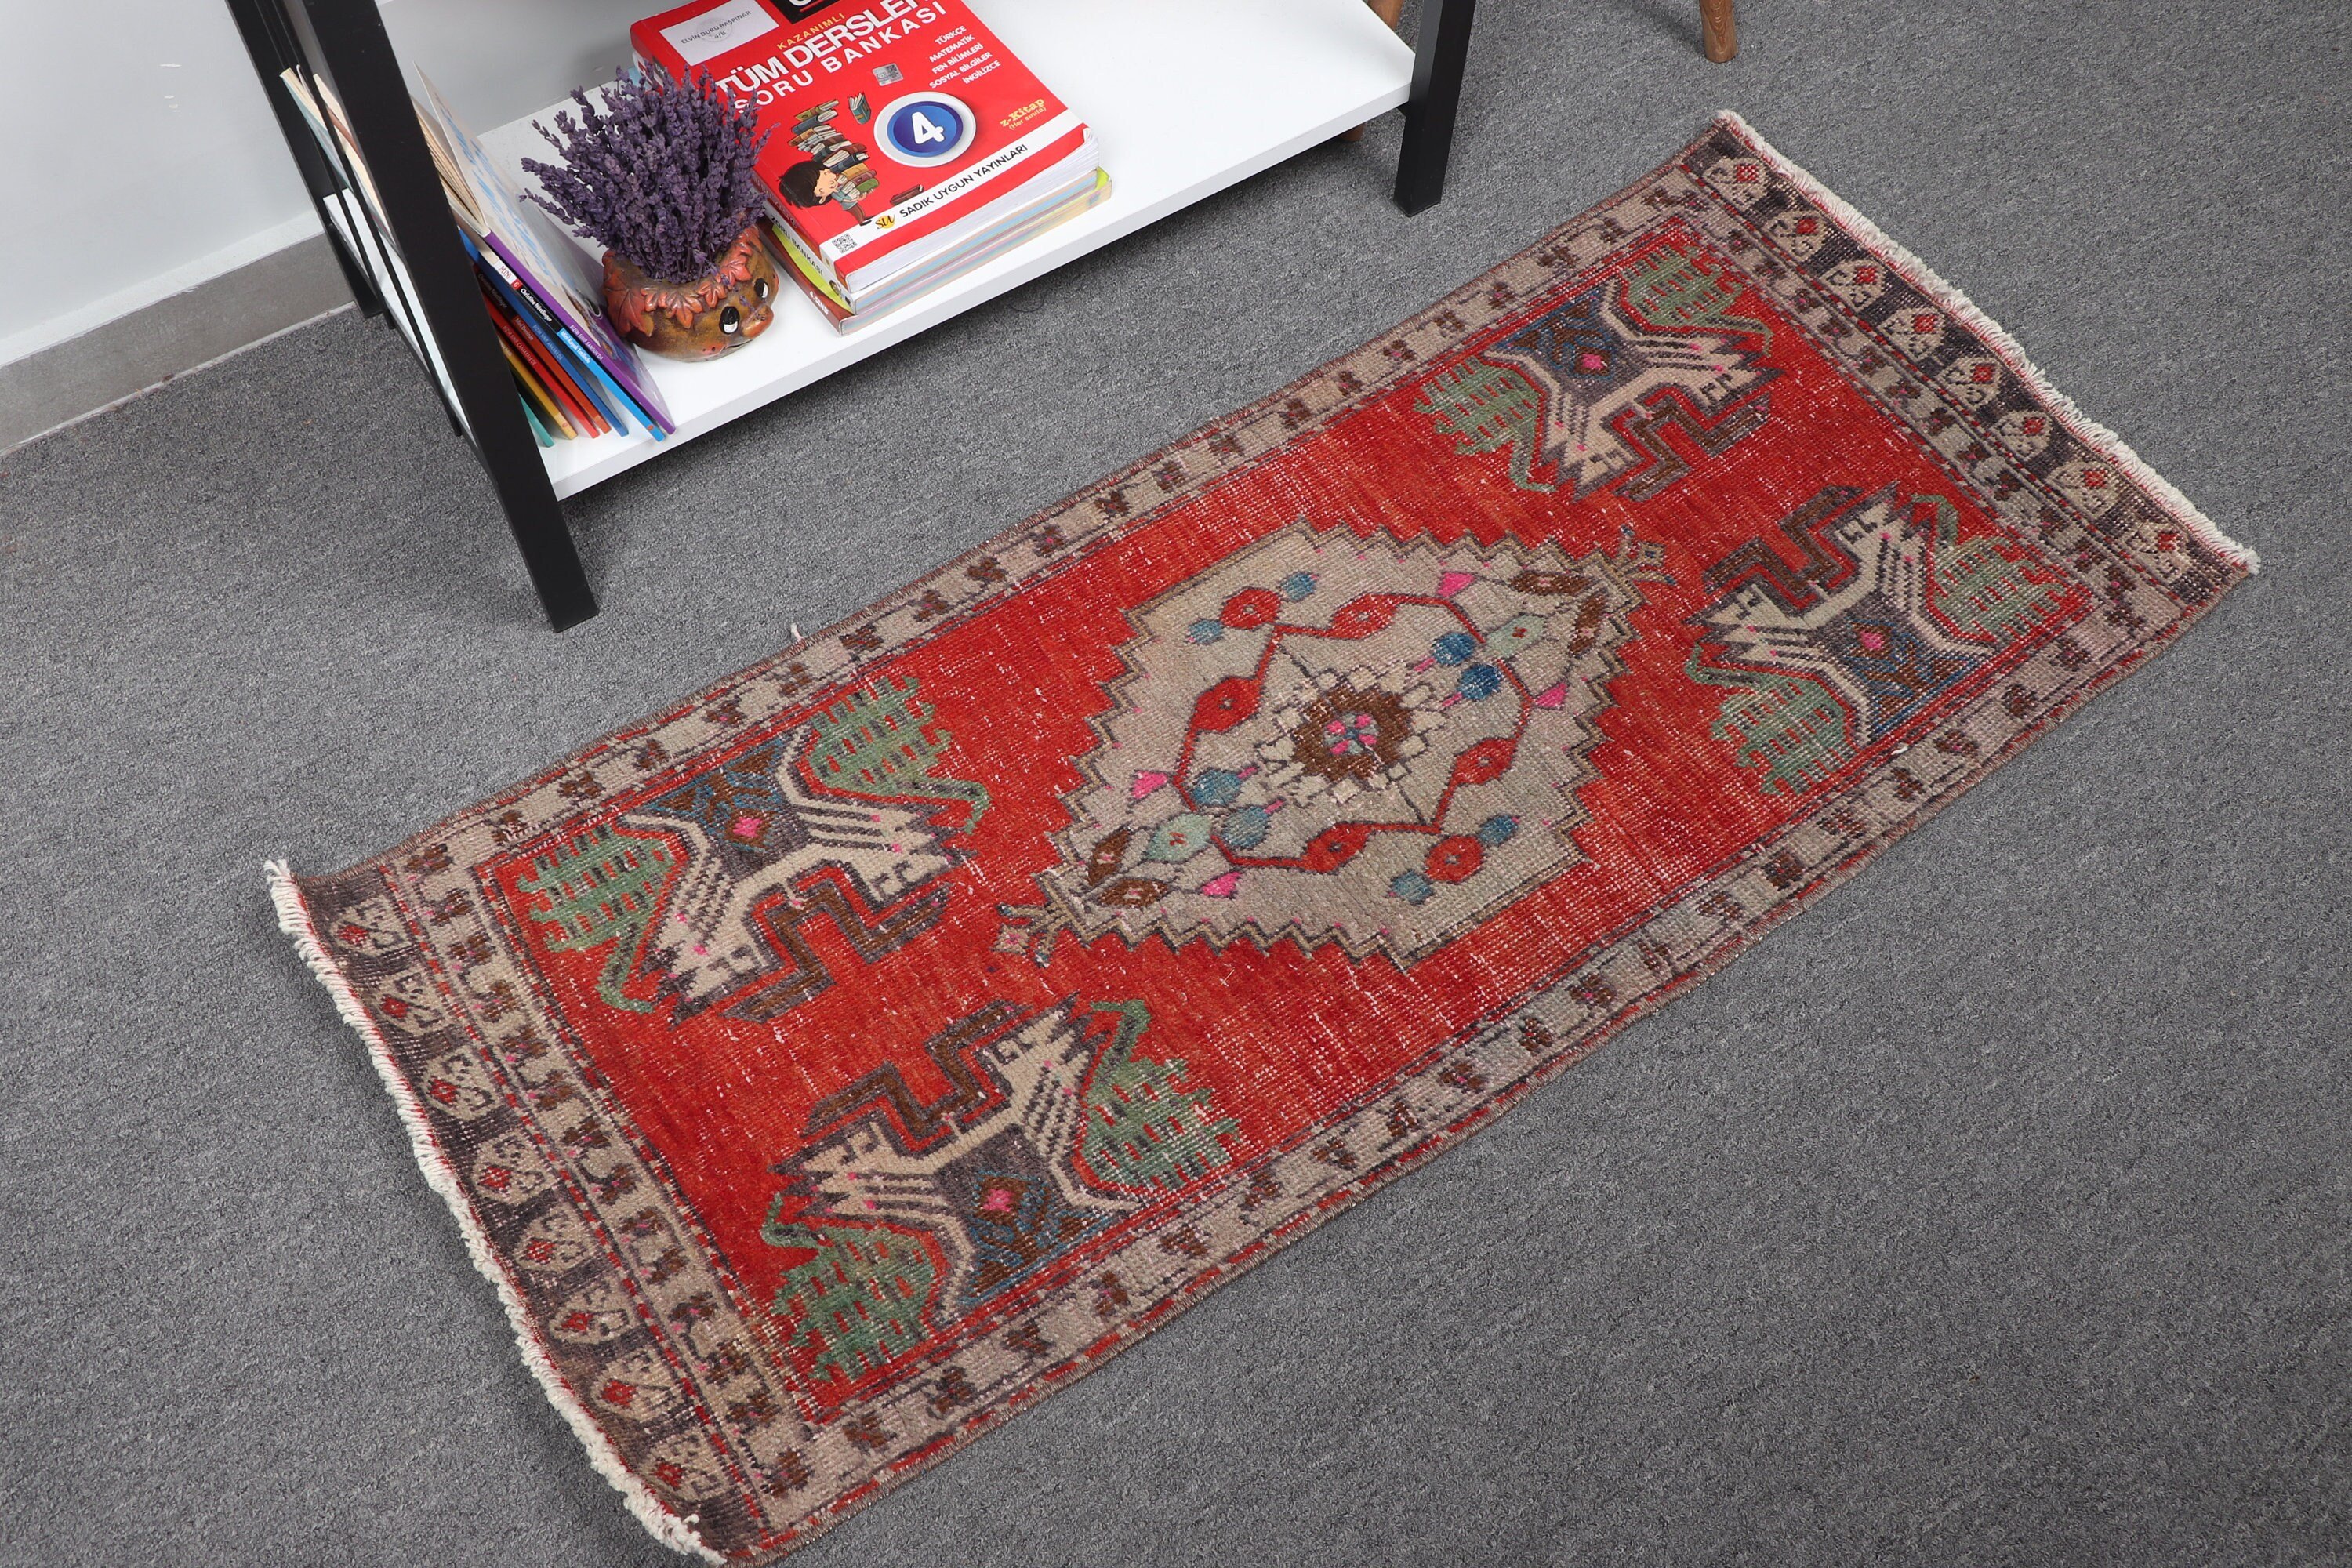 1.7x3.9 ft Small Rugs, Vintage Rug, Floor Rug, Wall Hanging Rugs, Abstract Rugs, Antique Rug, Turkish Rug, Kitchen Rug, Red Moroccan Rug